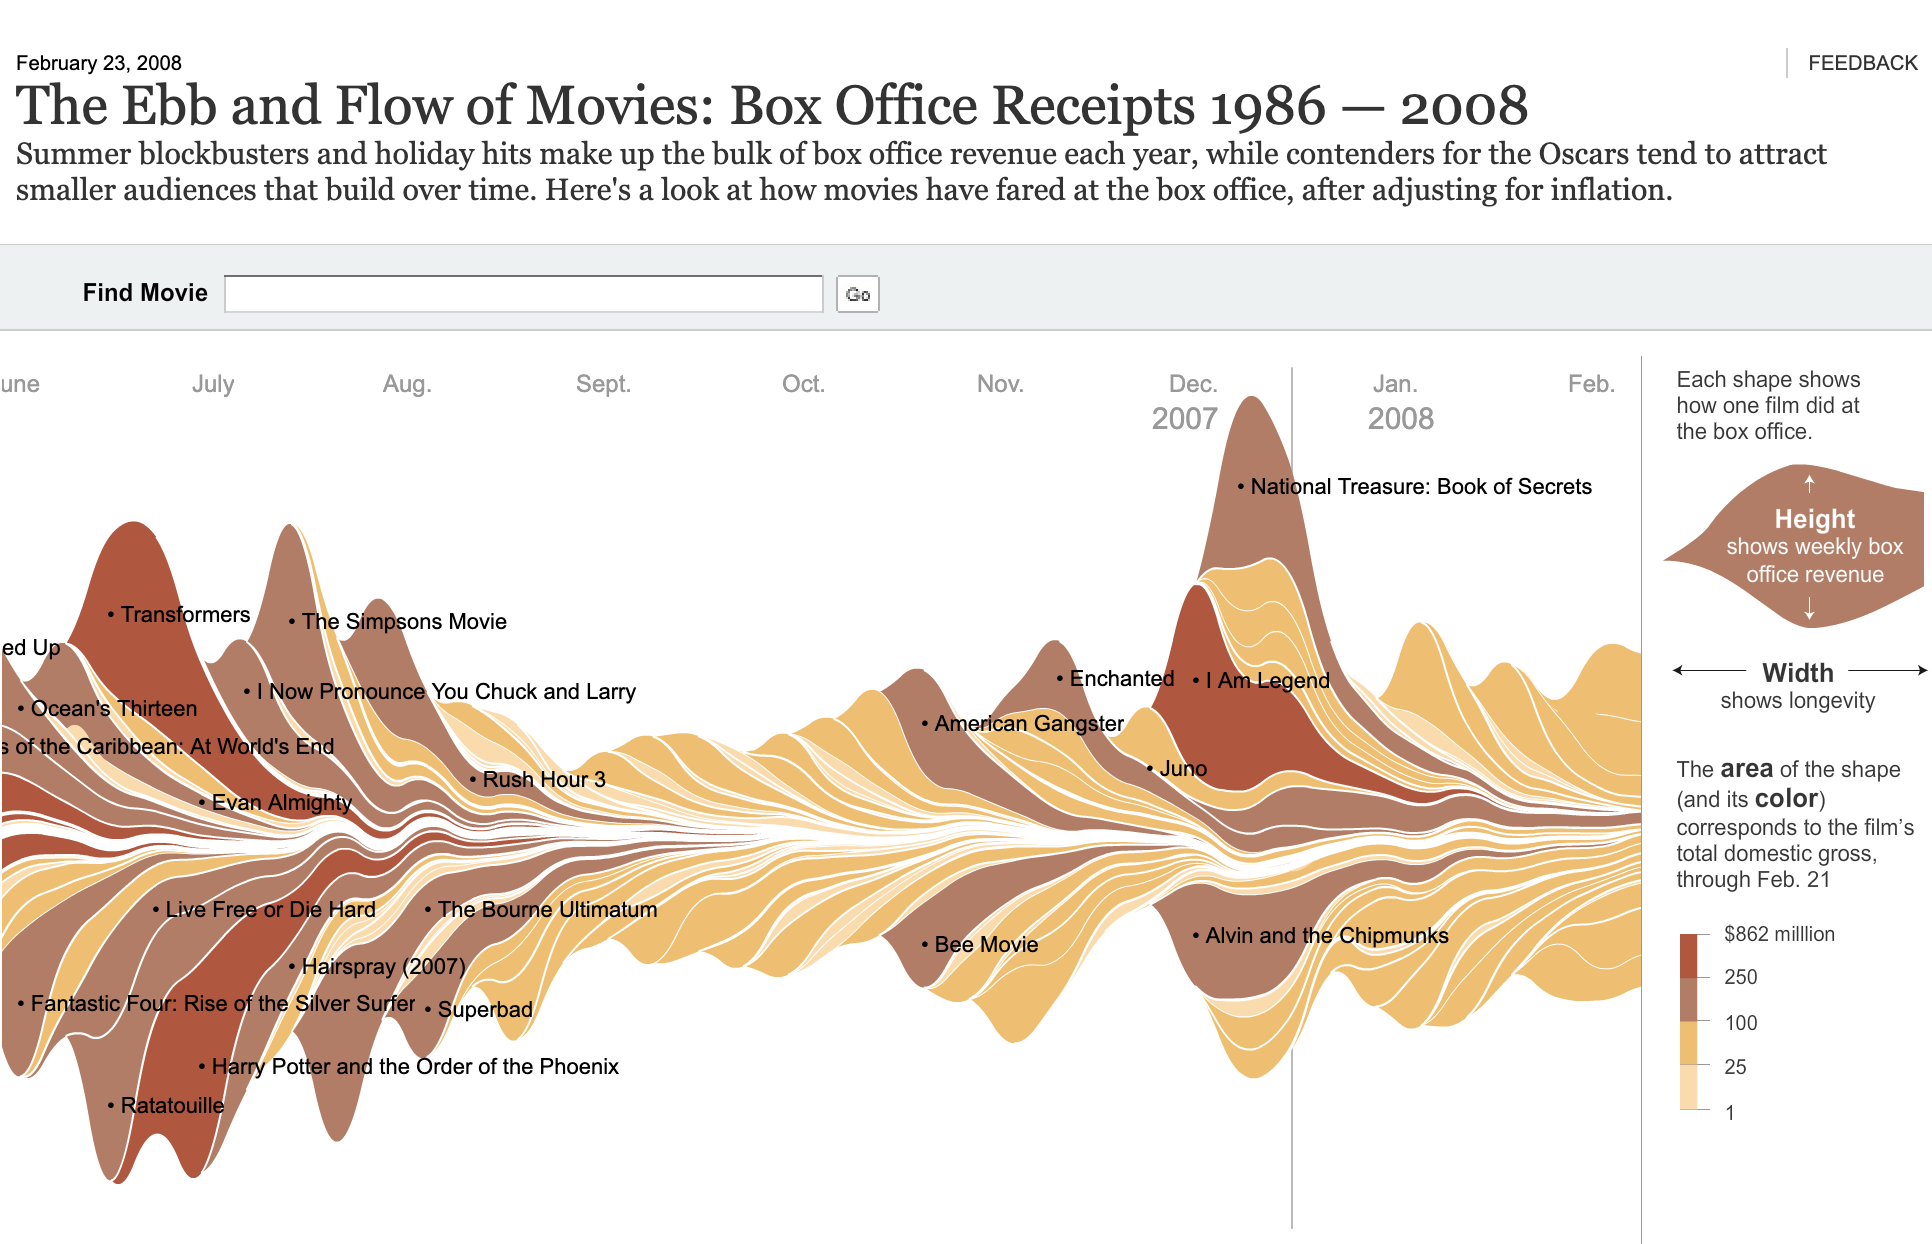 Screenshot of 'Ebb and Flow of Movies: Box Office Receipts 1986 - 2008’ in the New York Times